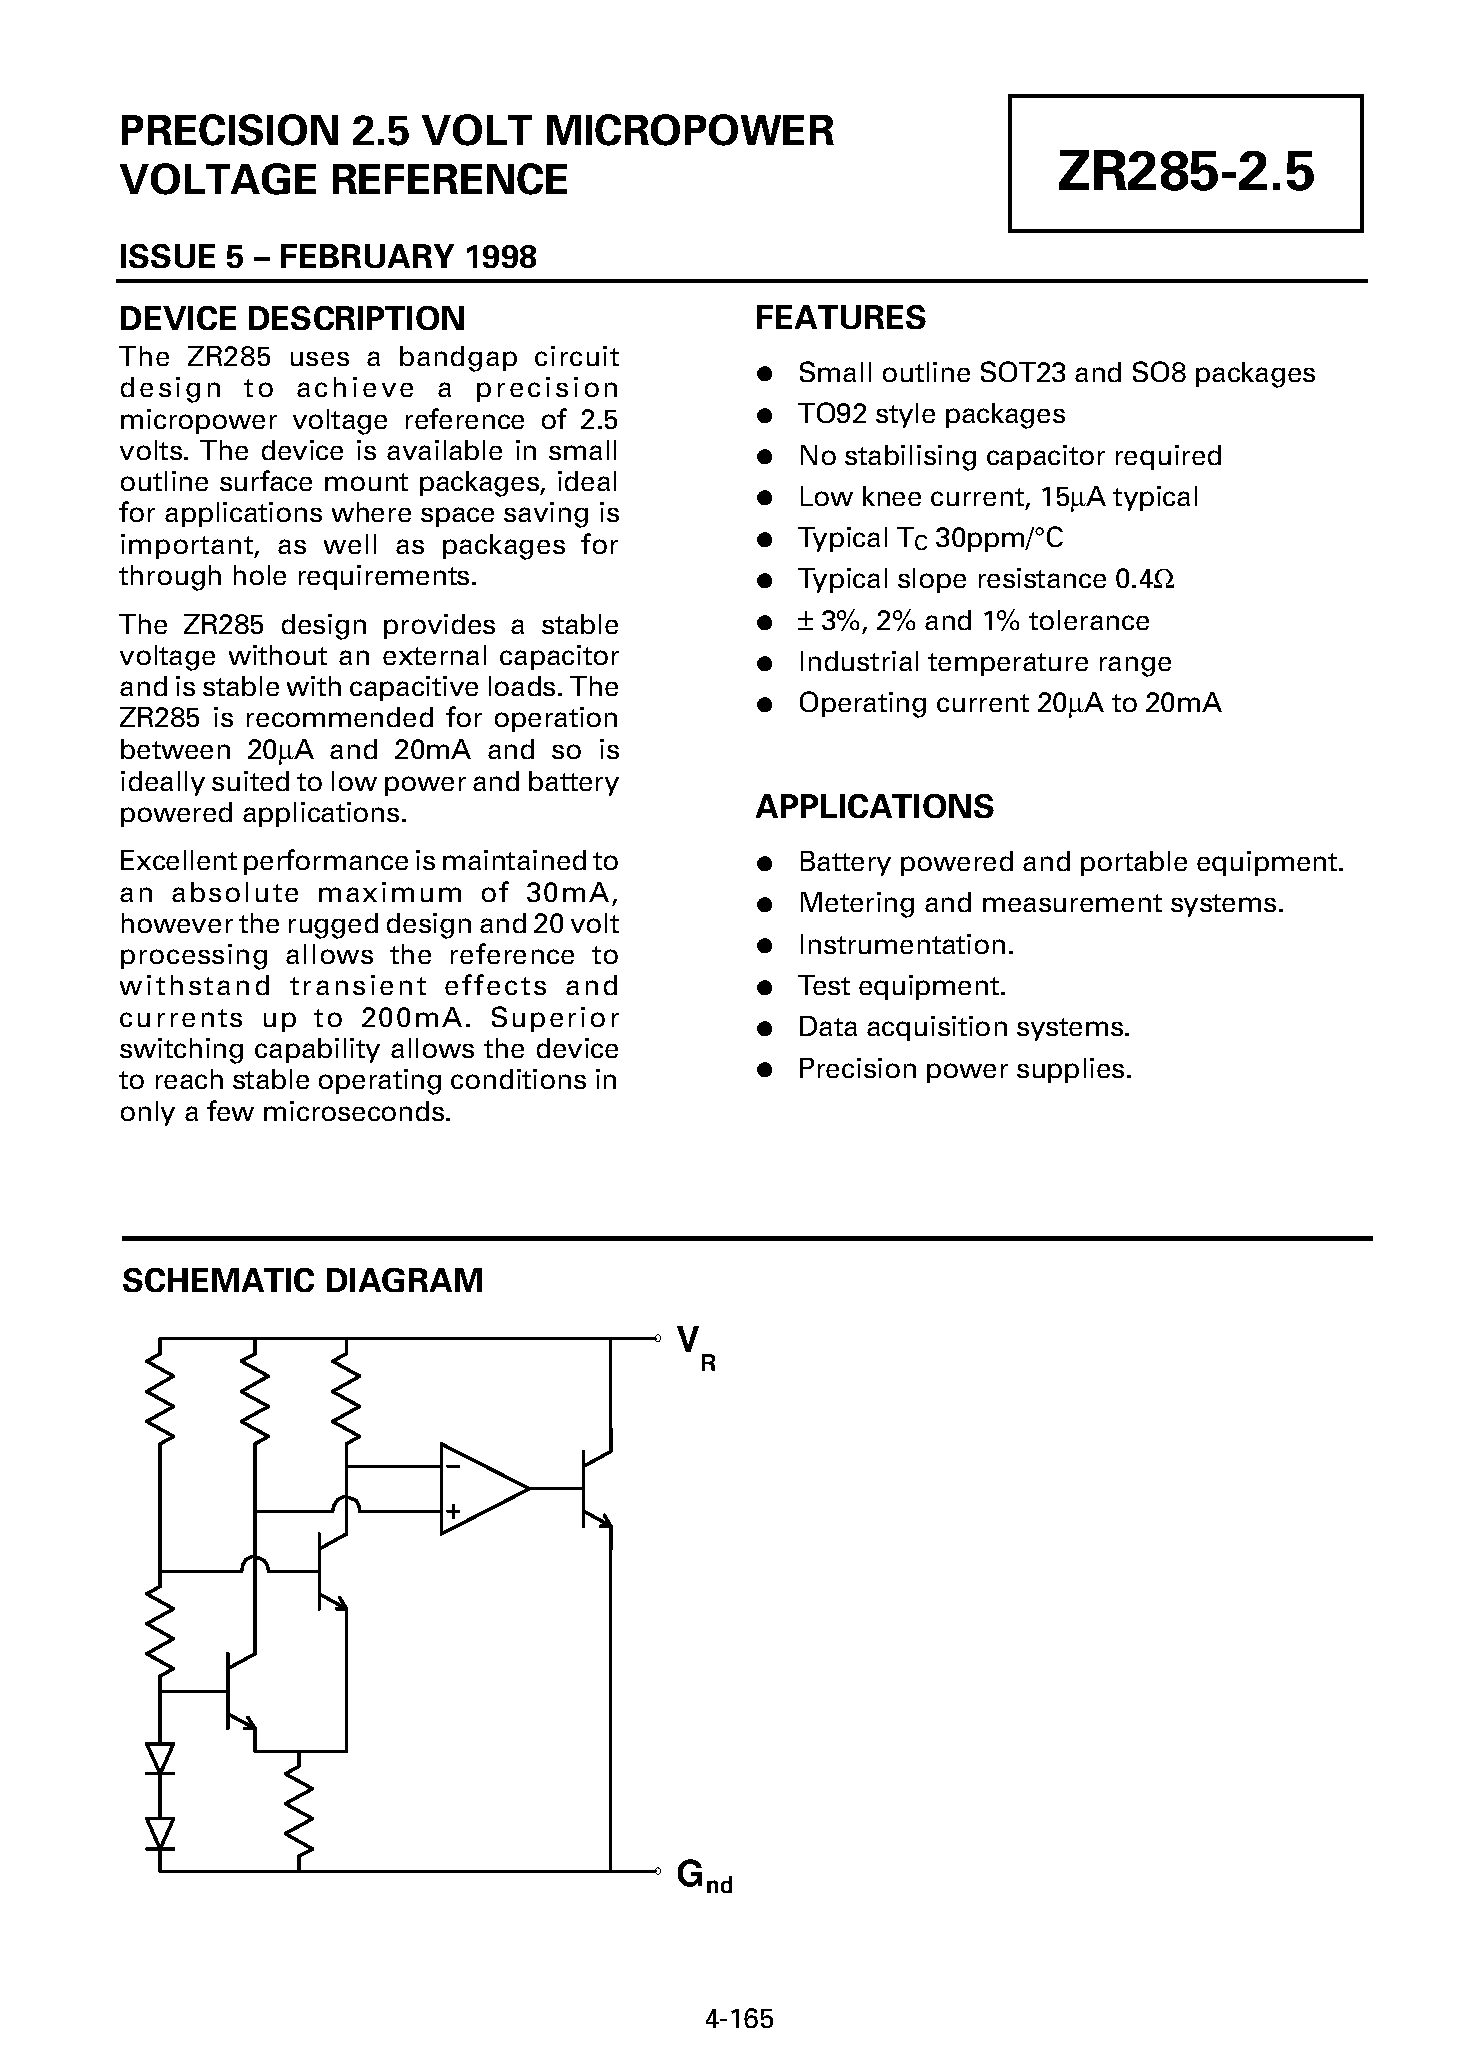 Datasheet ZR285Y01 - PRECISION 2.5 VOLT MICROPOWER VOLTAGE REFERENCE page 1